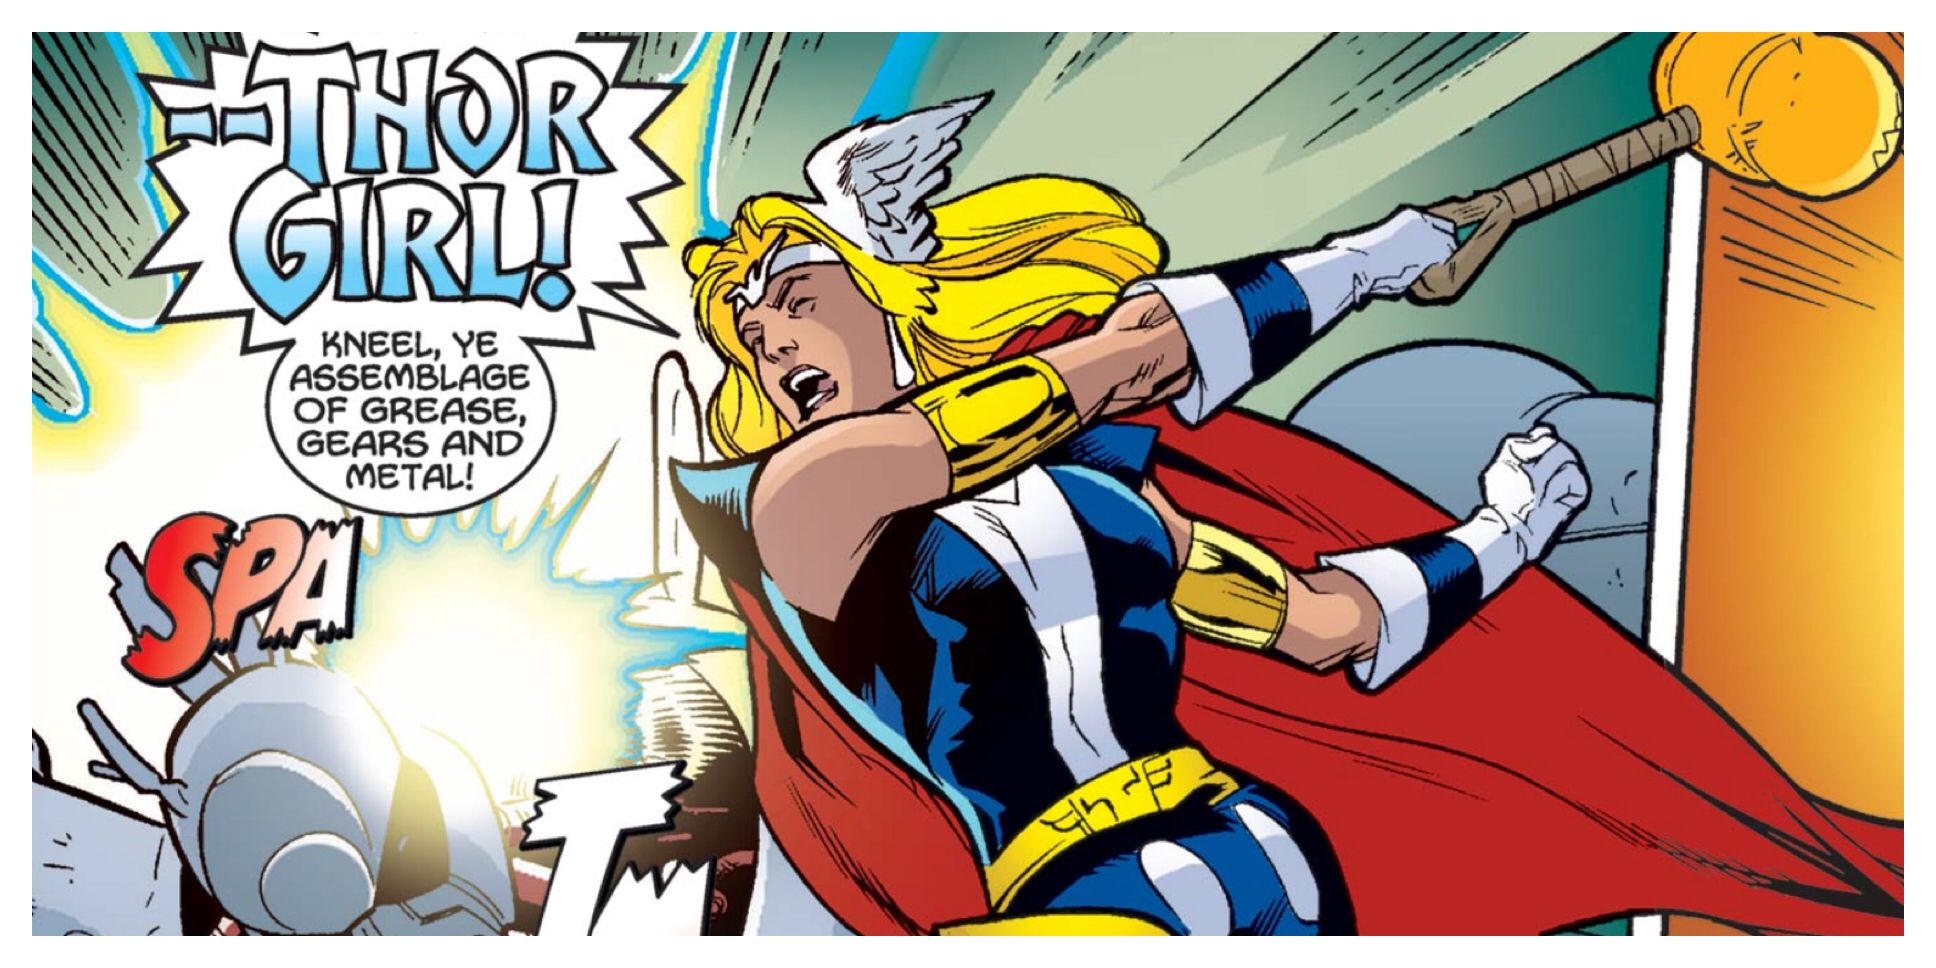 Thor Girl with Hammer